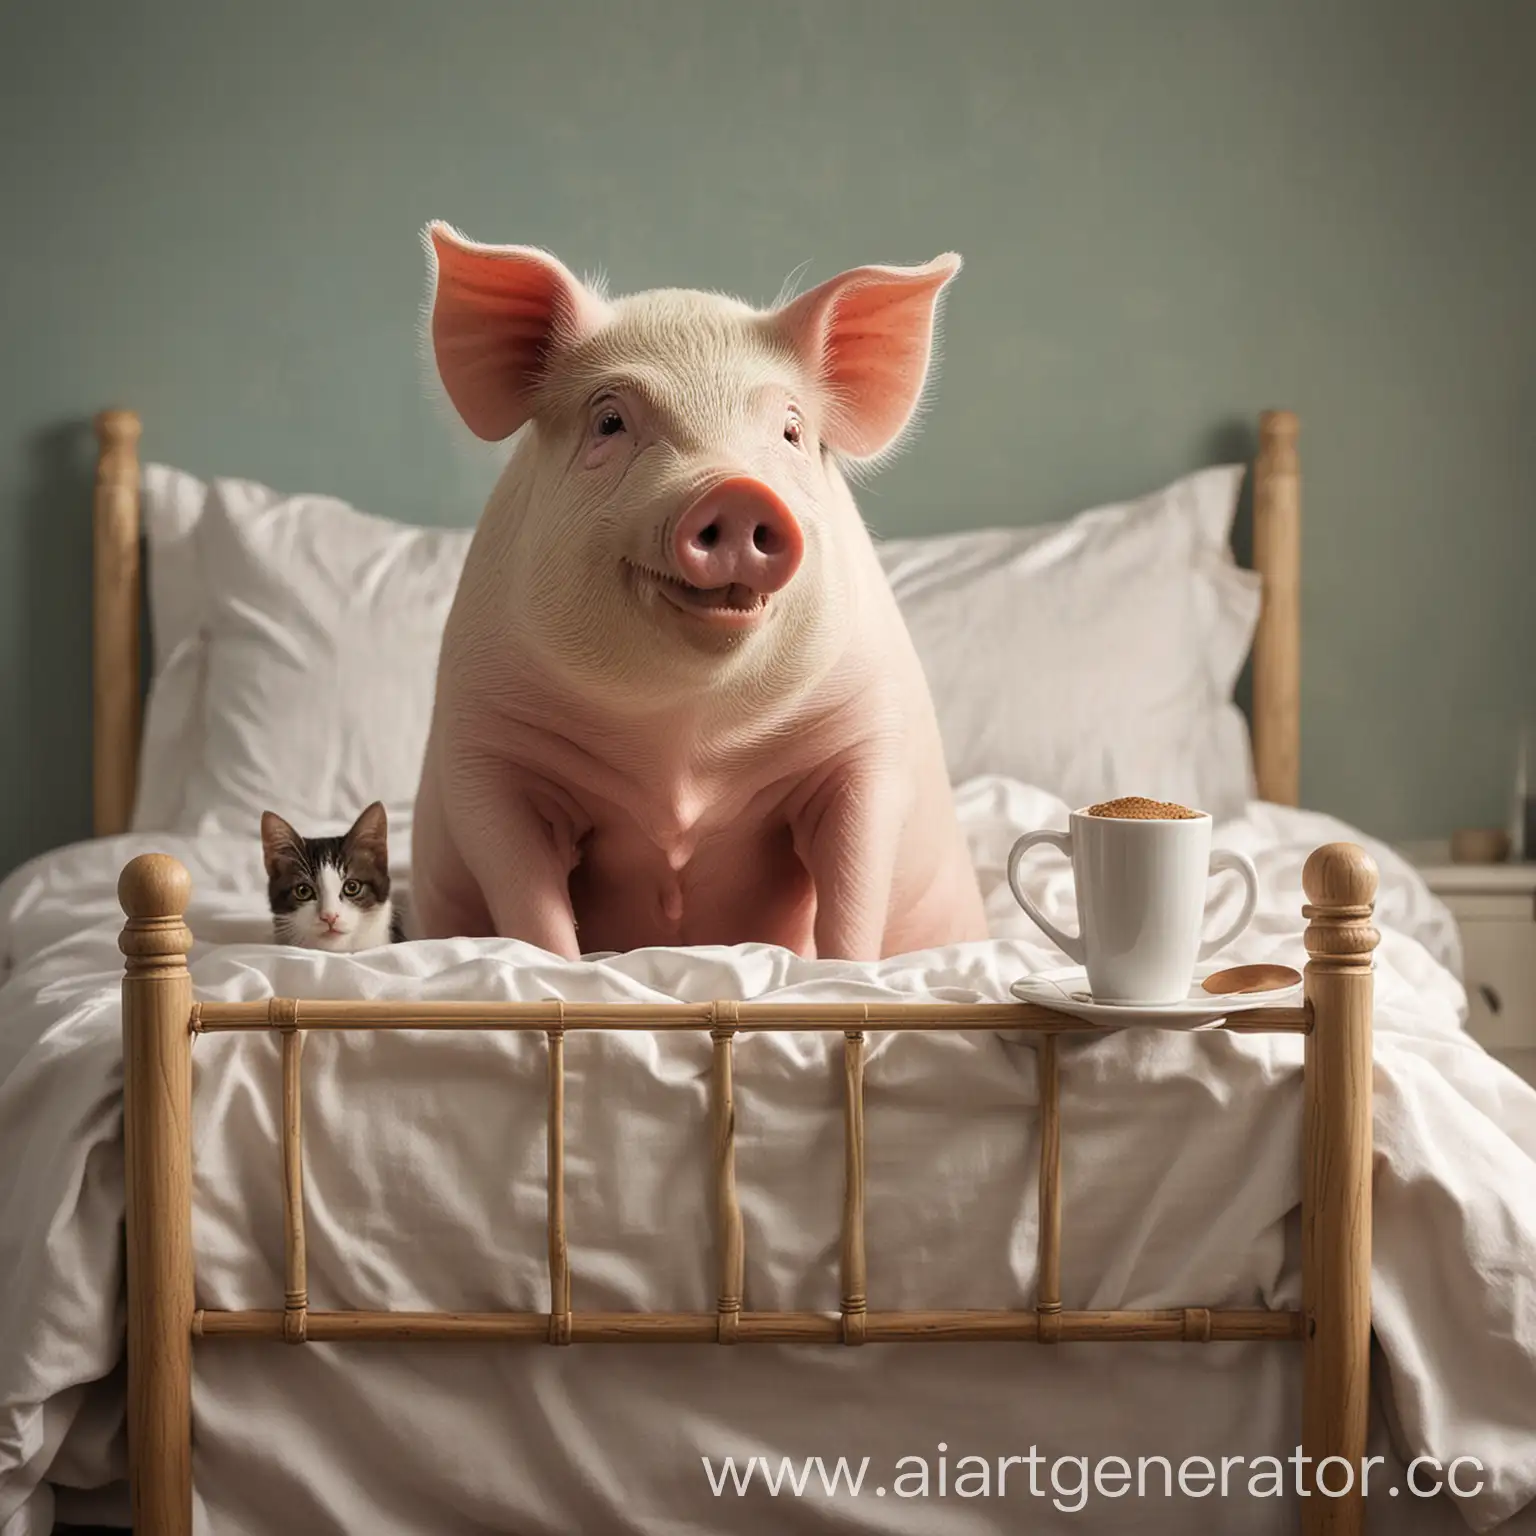 Pig-Serving-Coffee-to-Two-Cats-in-Bed